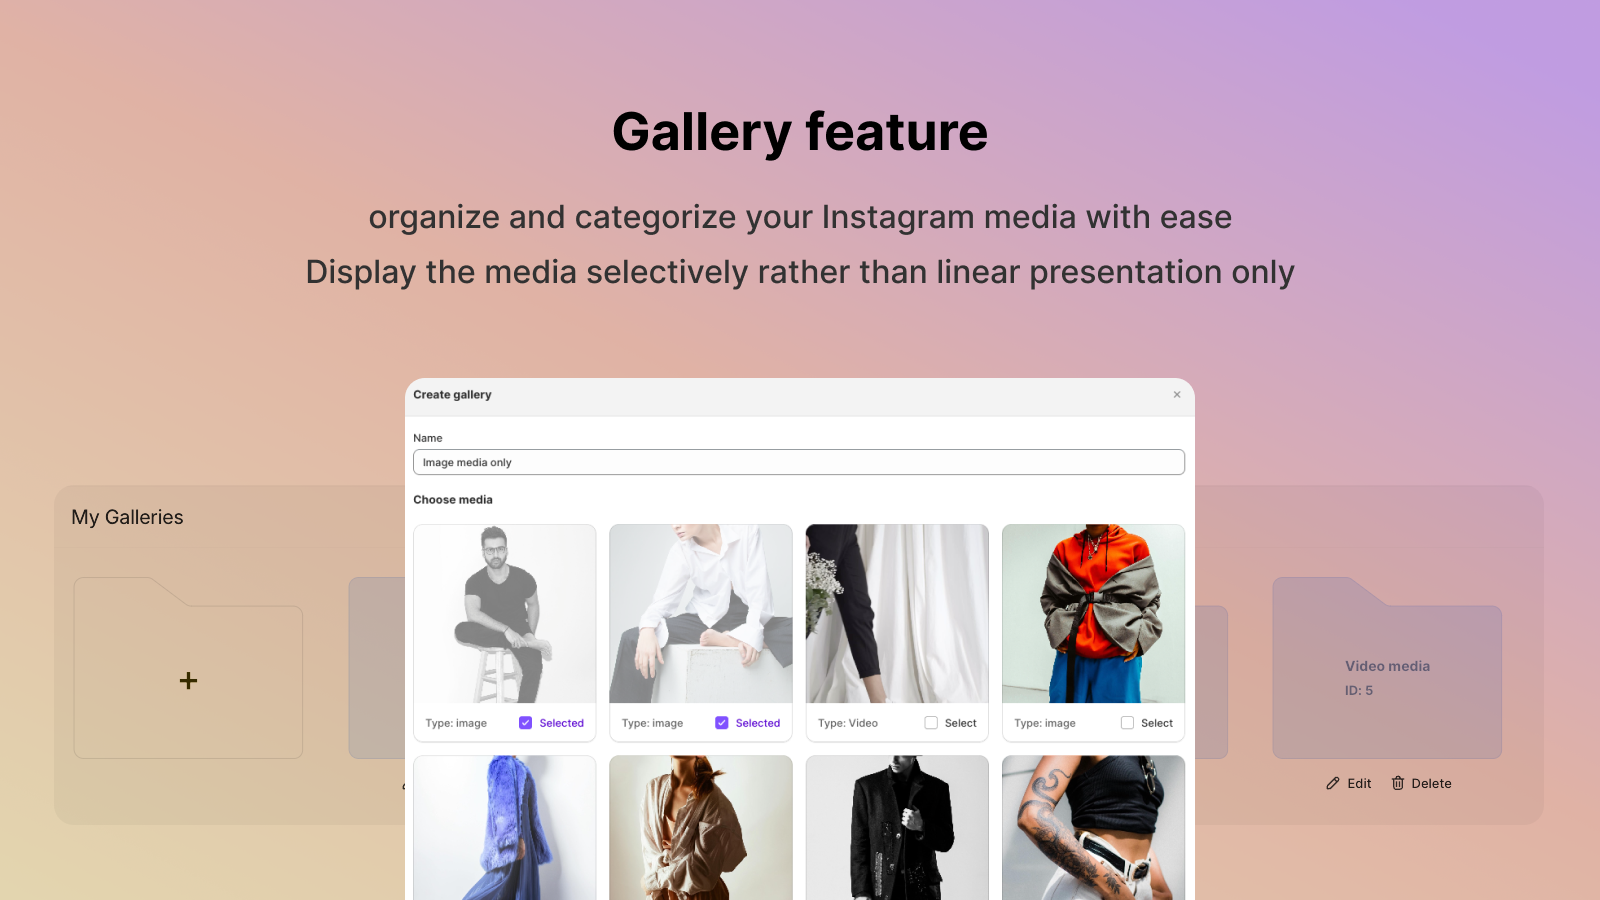 Organize and categorize your Instagram media with ease